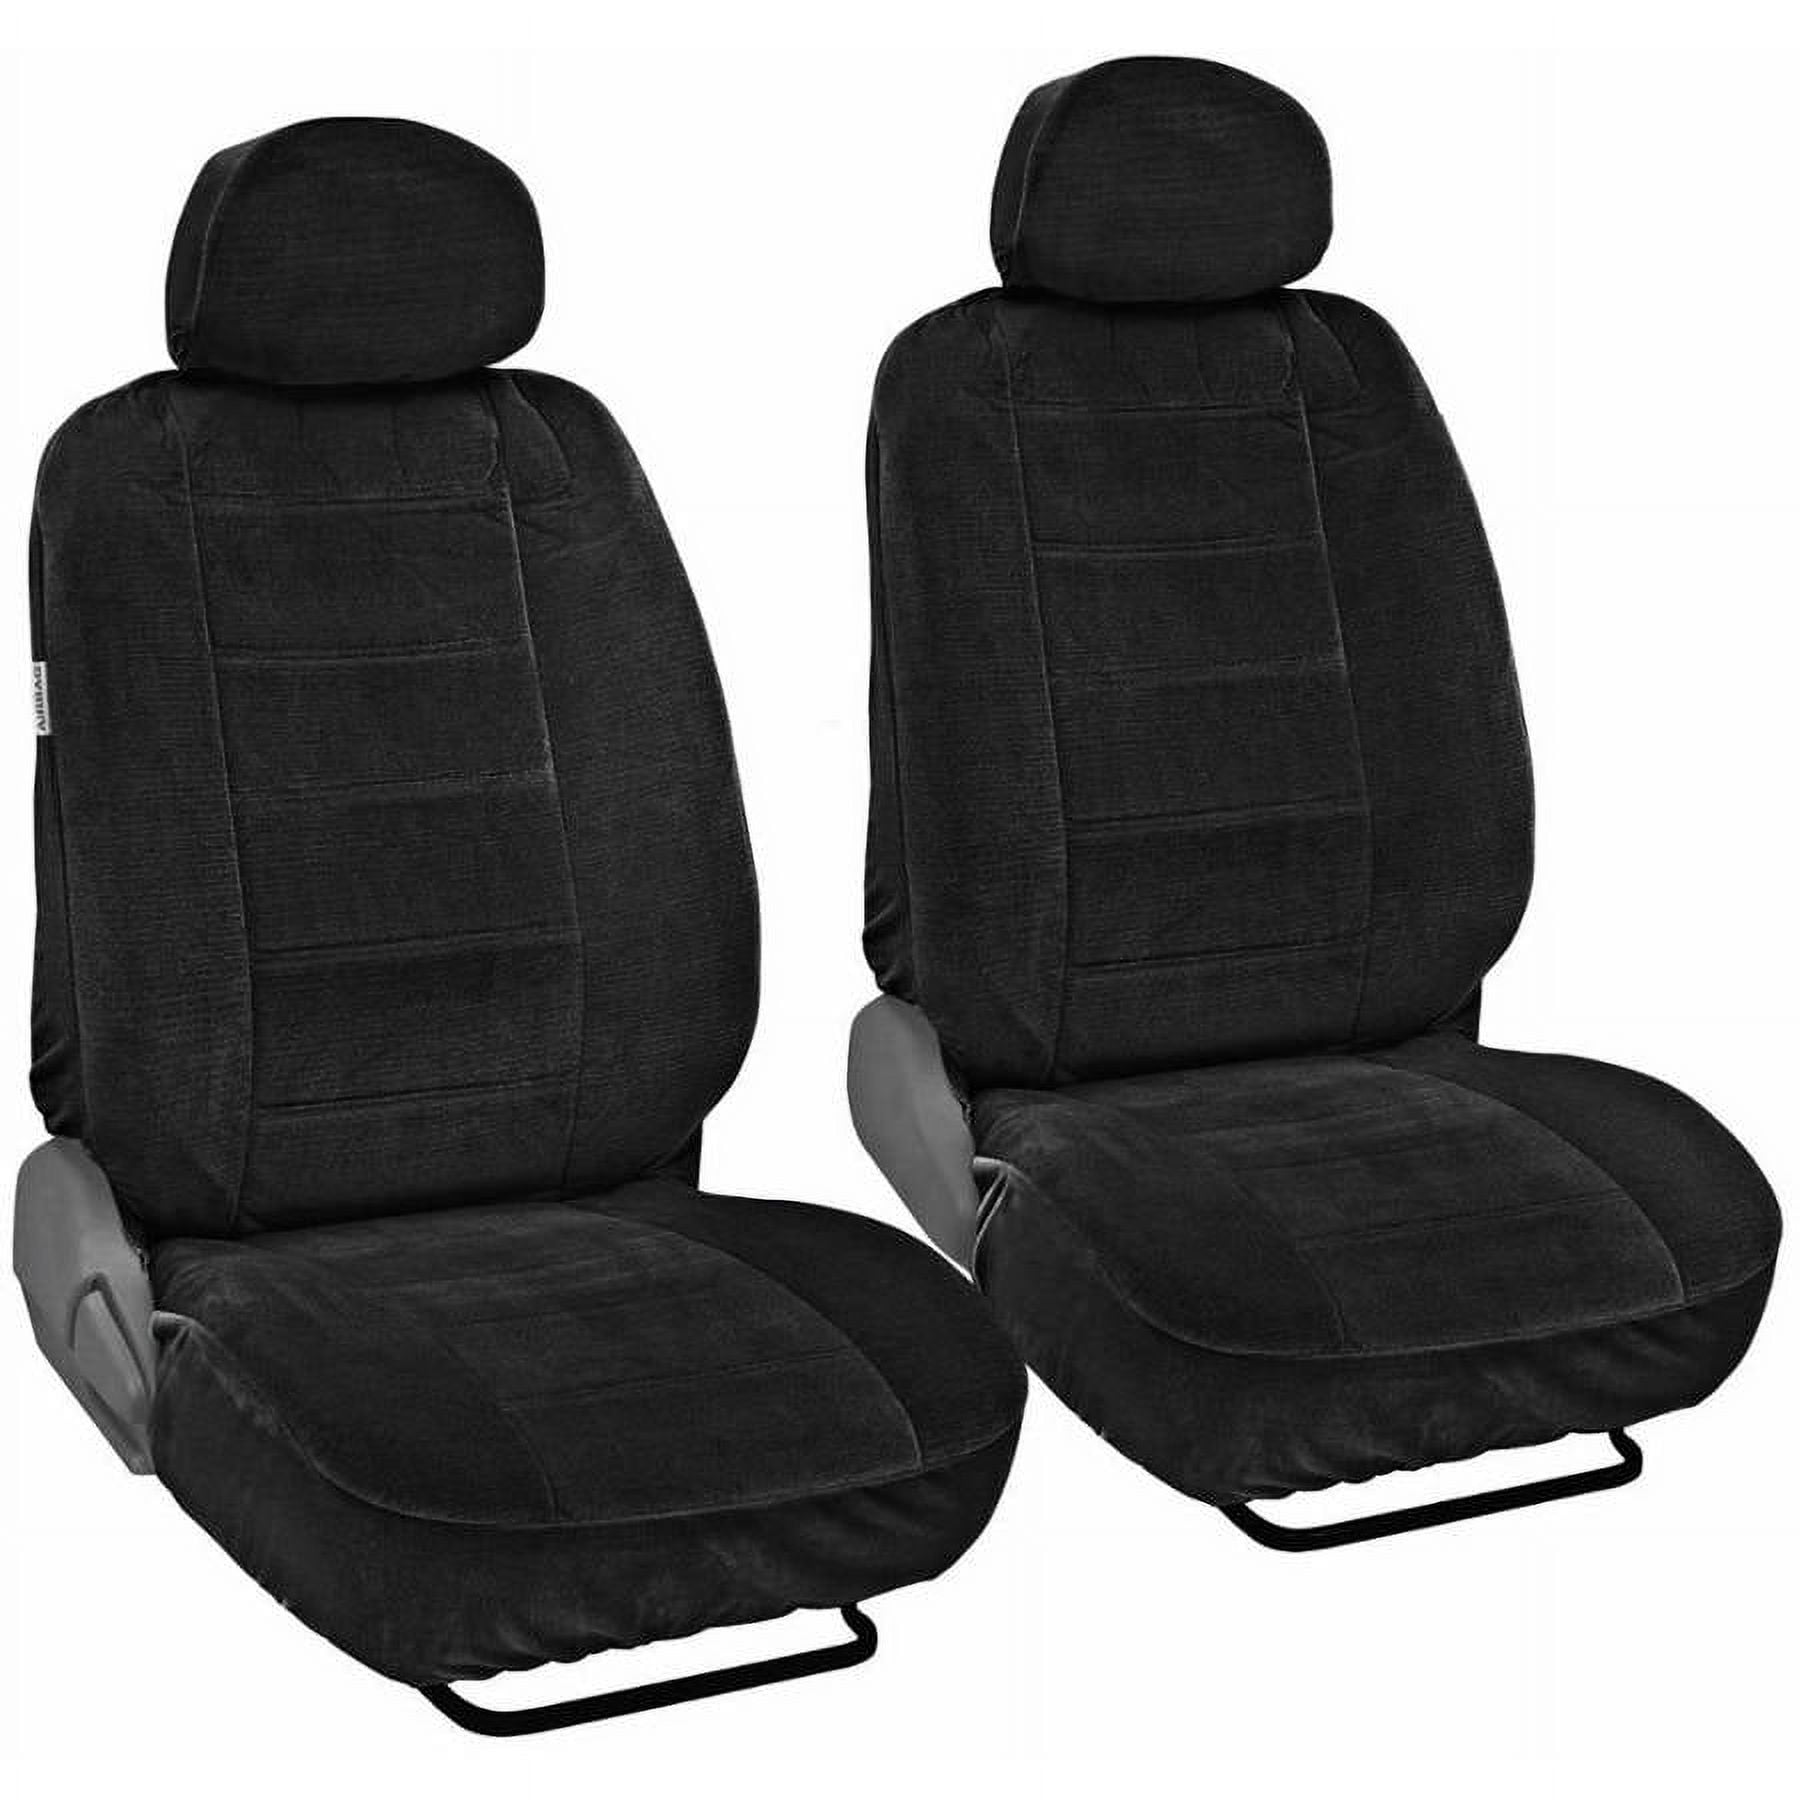 Auto Drive 2 Piece Low Back Memory Foam Car Seat Cover Polyester Black,  Universal Fit, 2010SC11